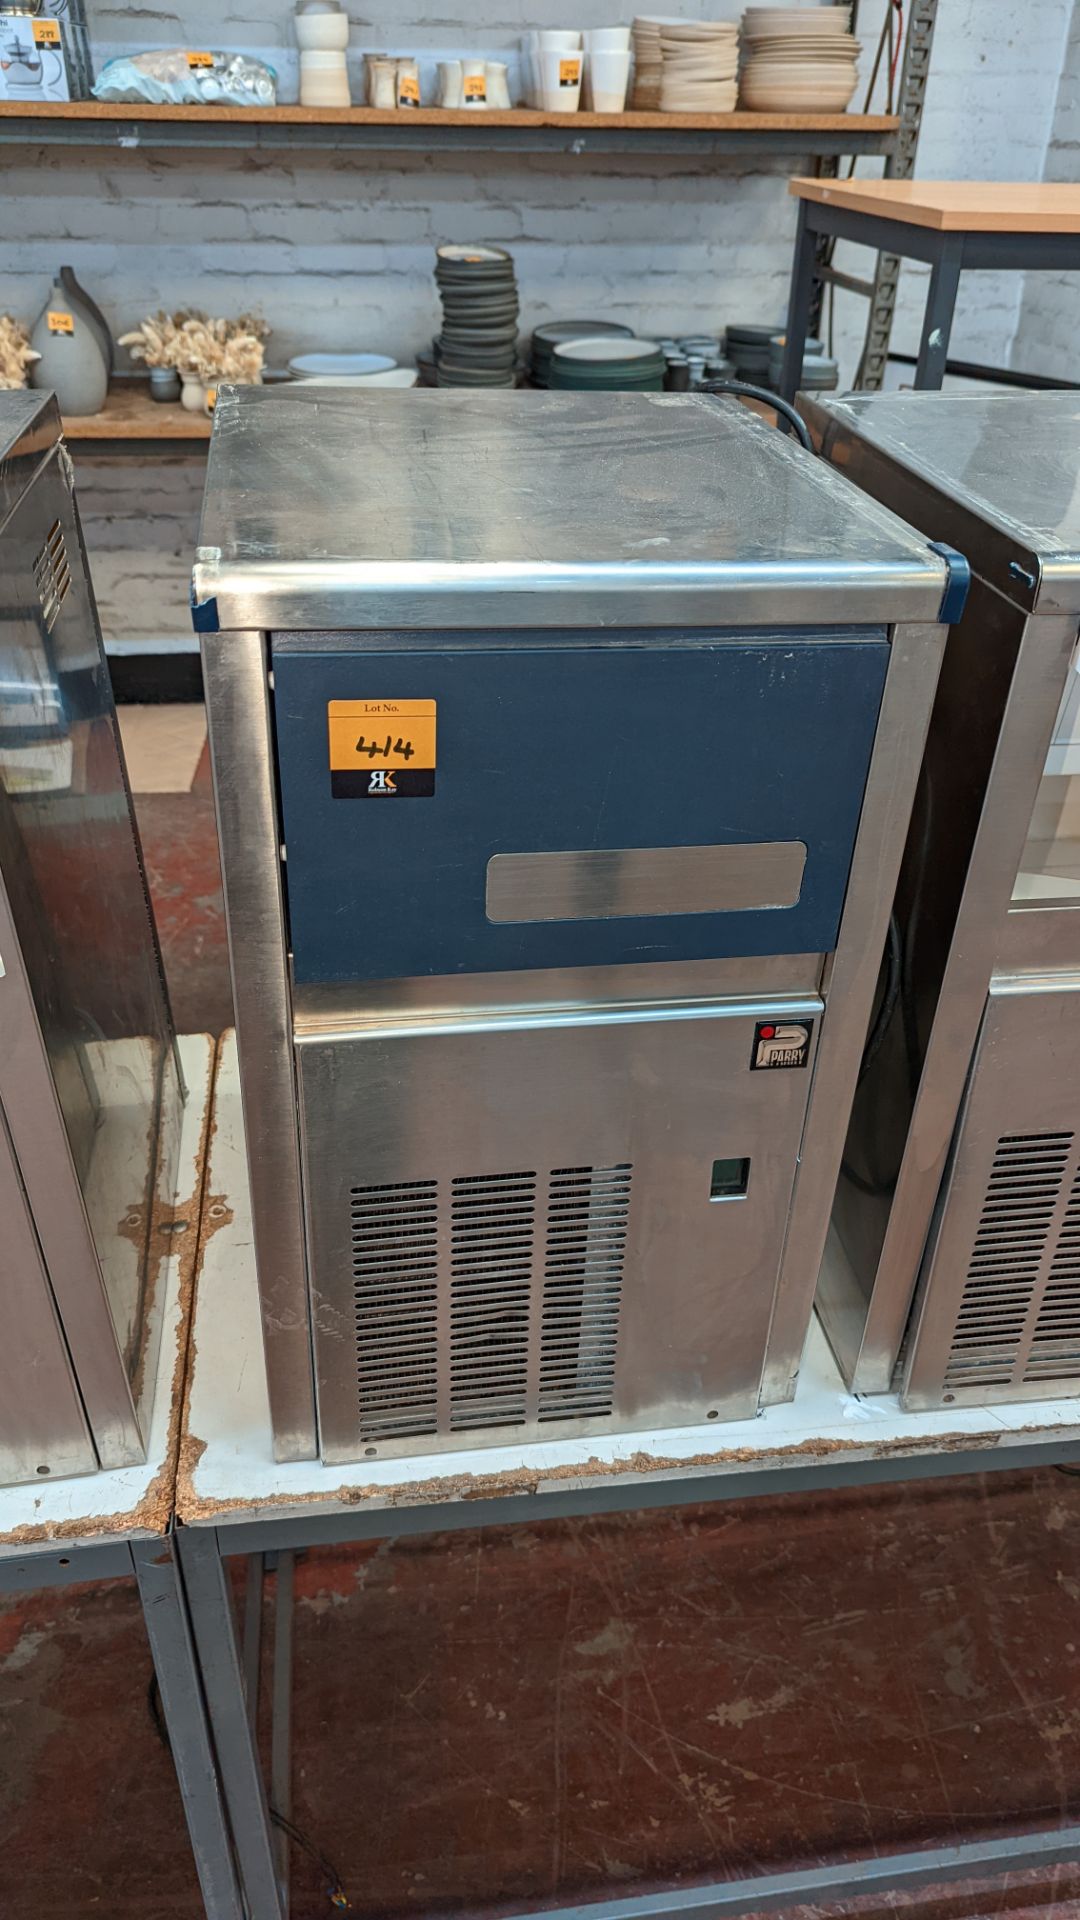 Parry stainless steel compact commercial ice maker model PIM20 - Image 2 of 5